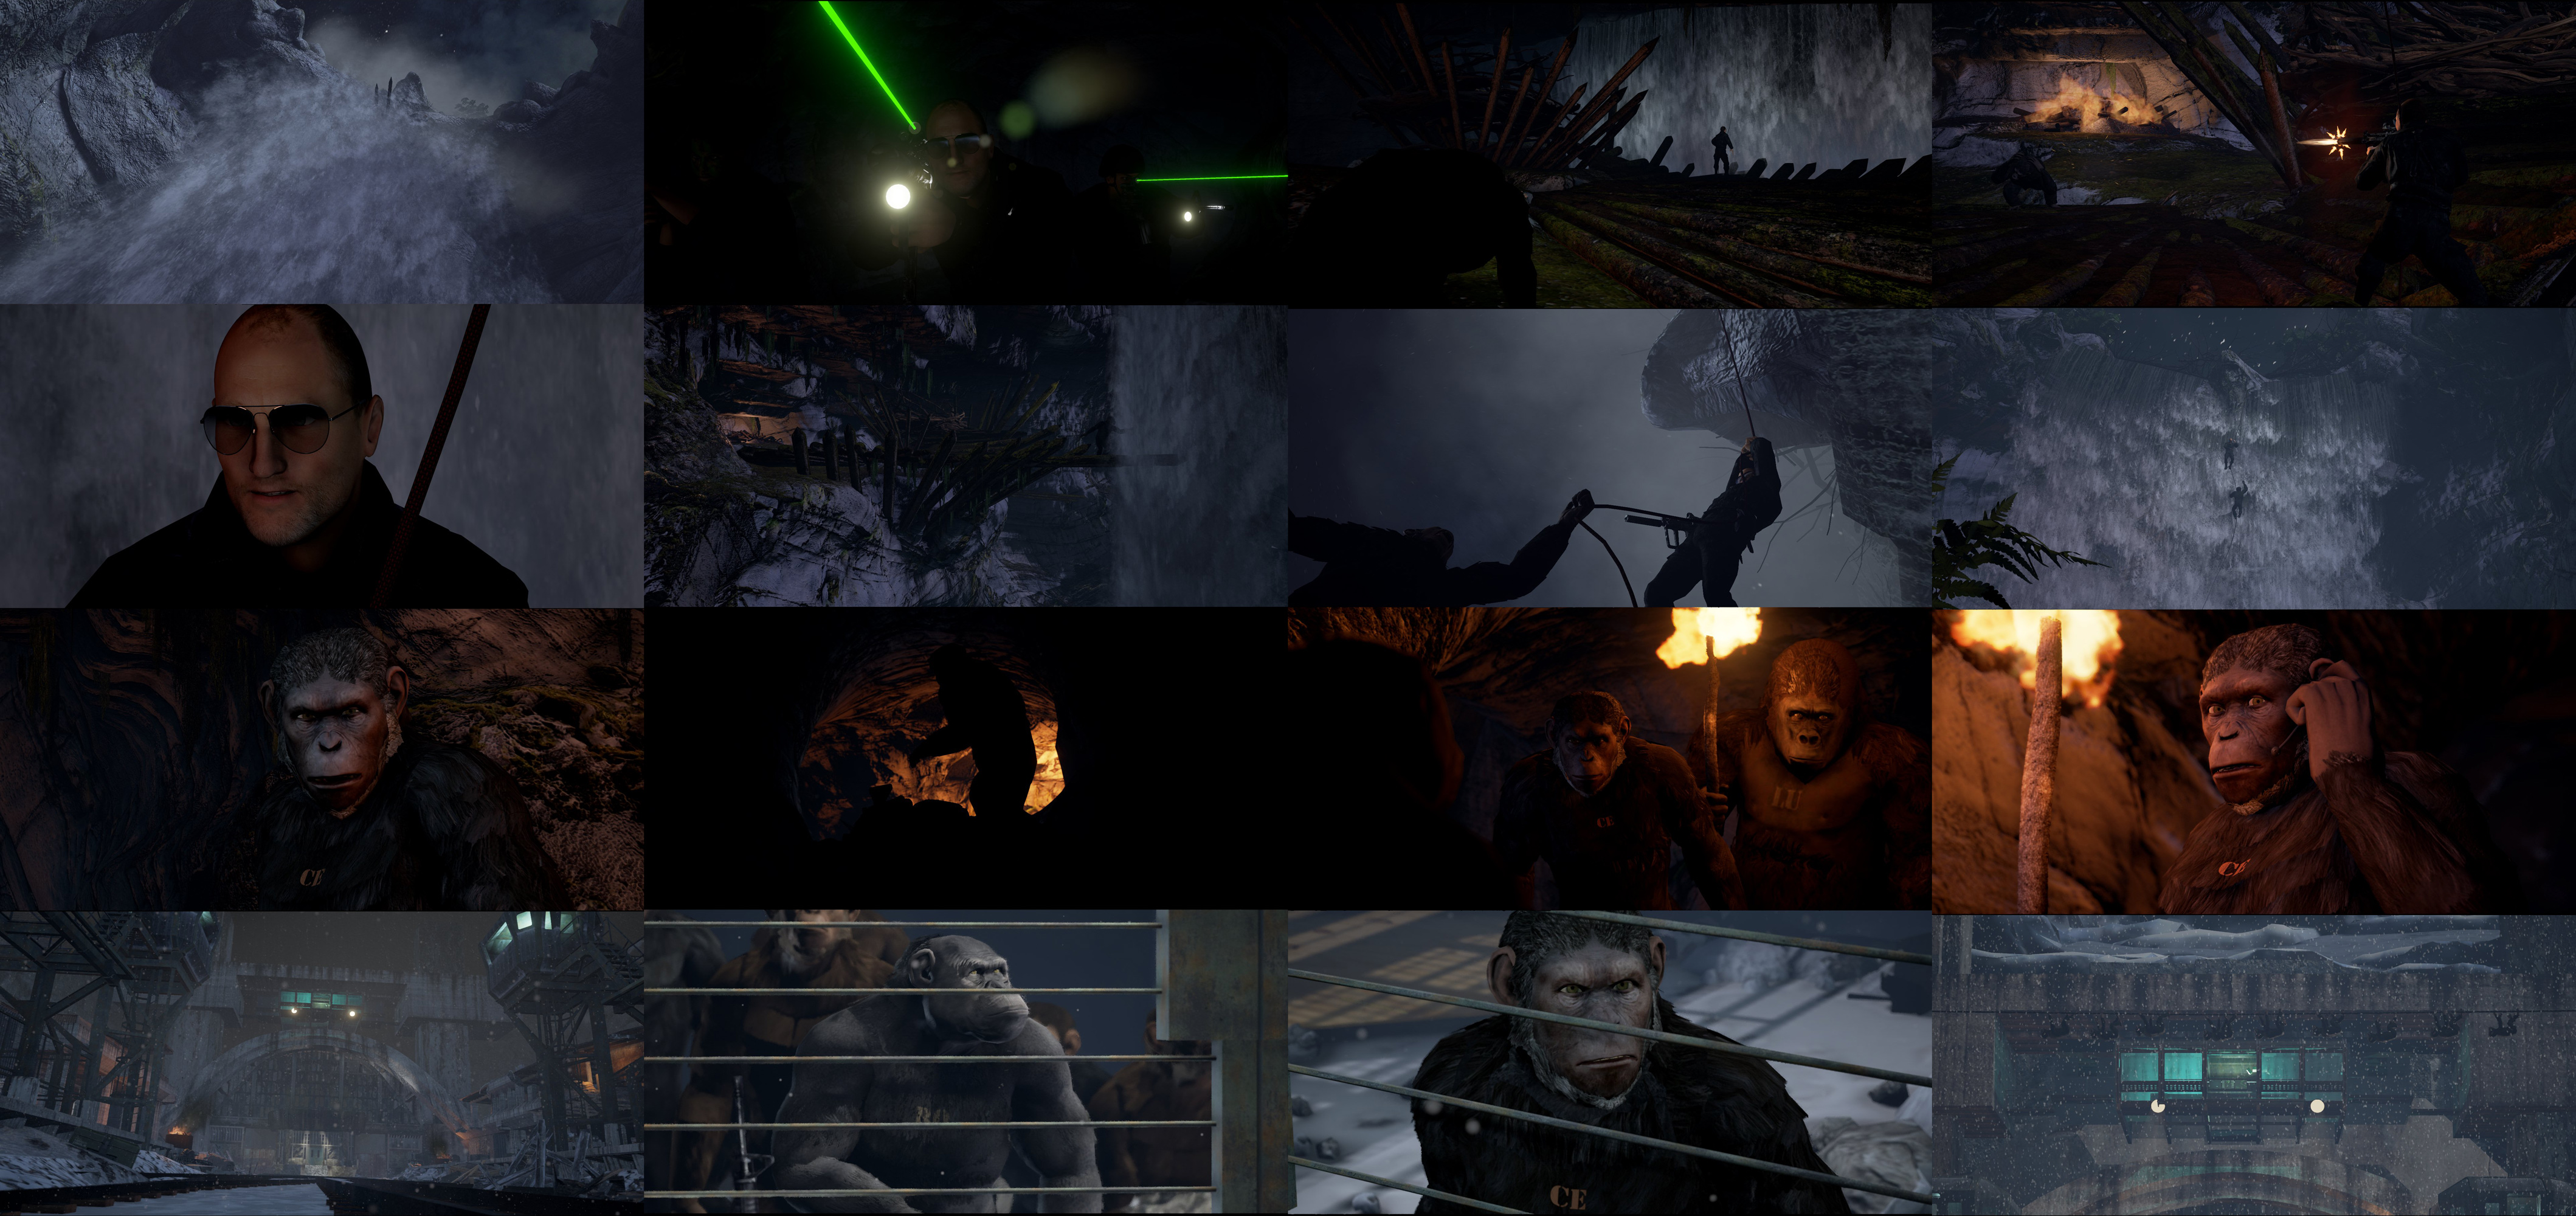 Acting as Unreal Engine Lead I created models, VFX, shaders lighting and animation for previs sequences on set of War for the Planet of the Apes. Realtime render in Unreal4